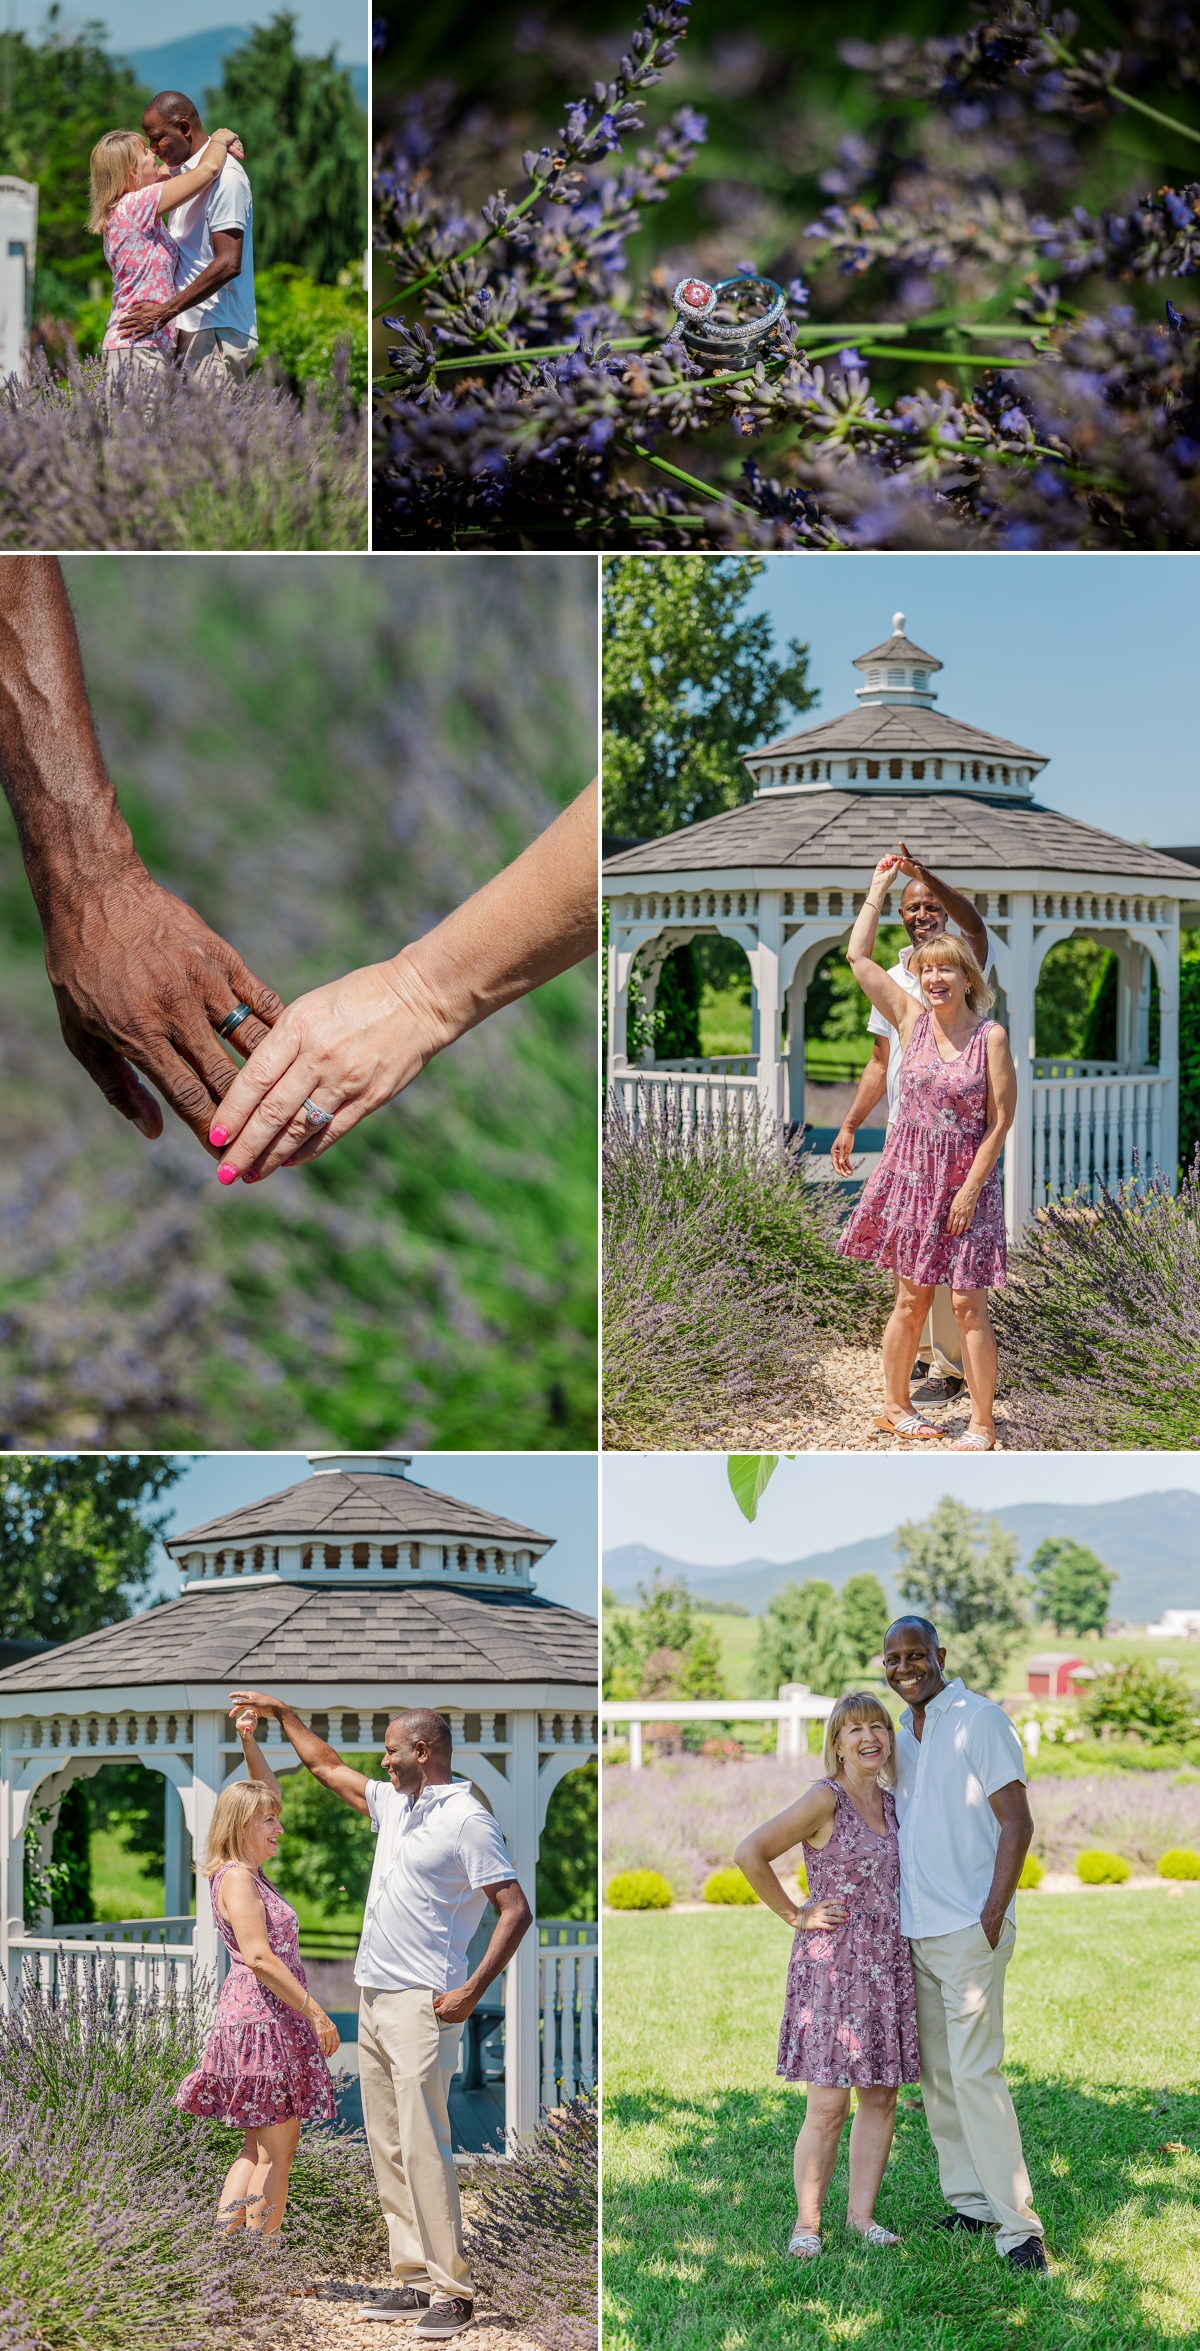 Close up of the rings on the couples' hands and on the lavender while the couple dances together among the flowers; captured by their engagement photographer